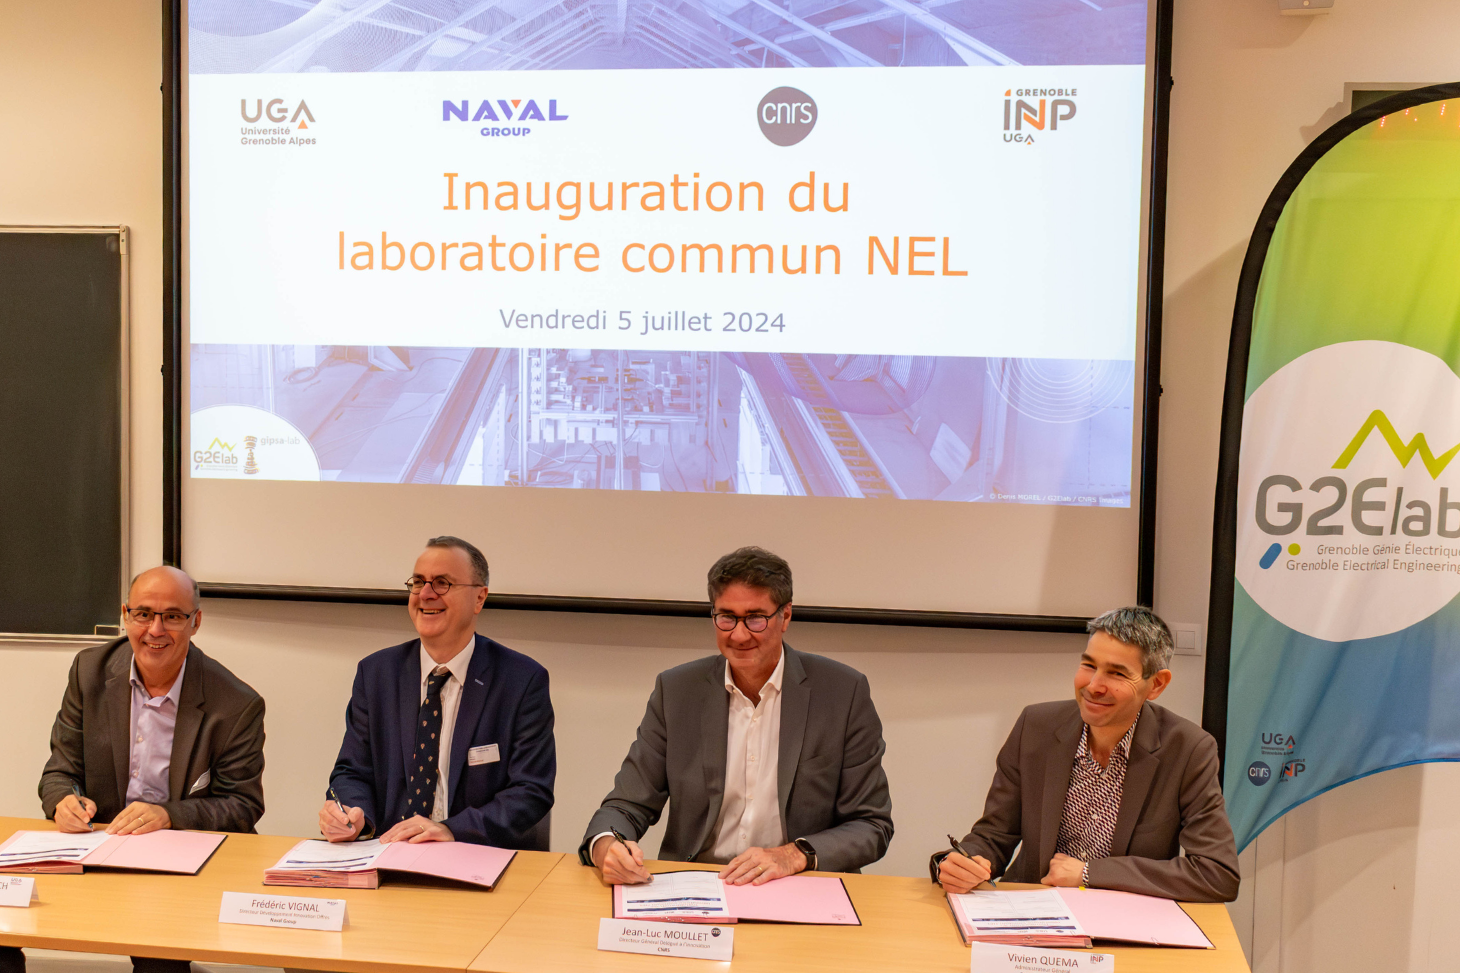 From left to right: Yassine Lakhnech, President of the Université Grenoble Alpes; Frédéric Vignal, Head of Development and Innovation of Naval Group; Jean-Luc Moullet, the CNRS Chief Innovation Officer; and Vivien Quéma, President of Grenoble INP – UGA. ©